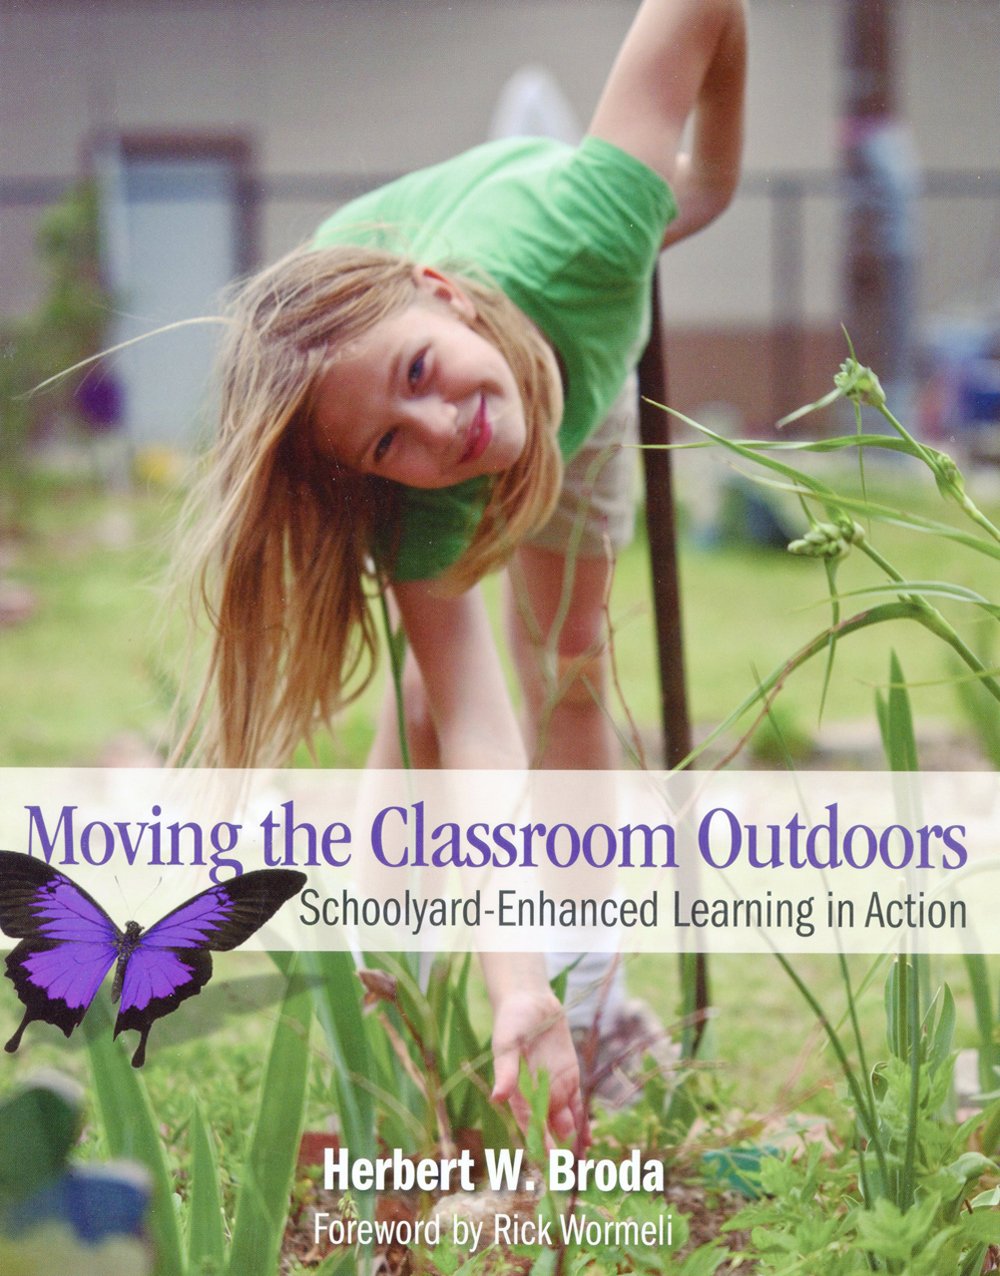 Moving the Classroom Outdoors: Schoolyard-Enhanced Learning in Action